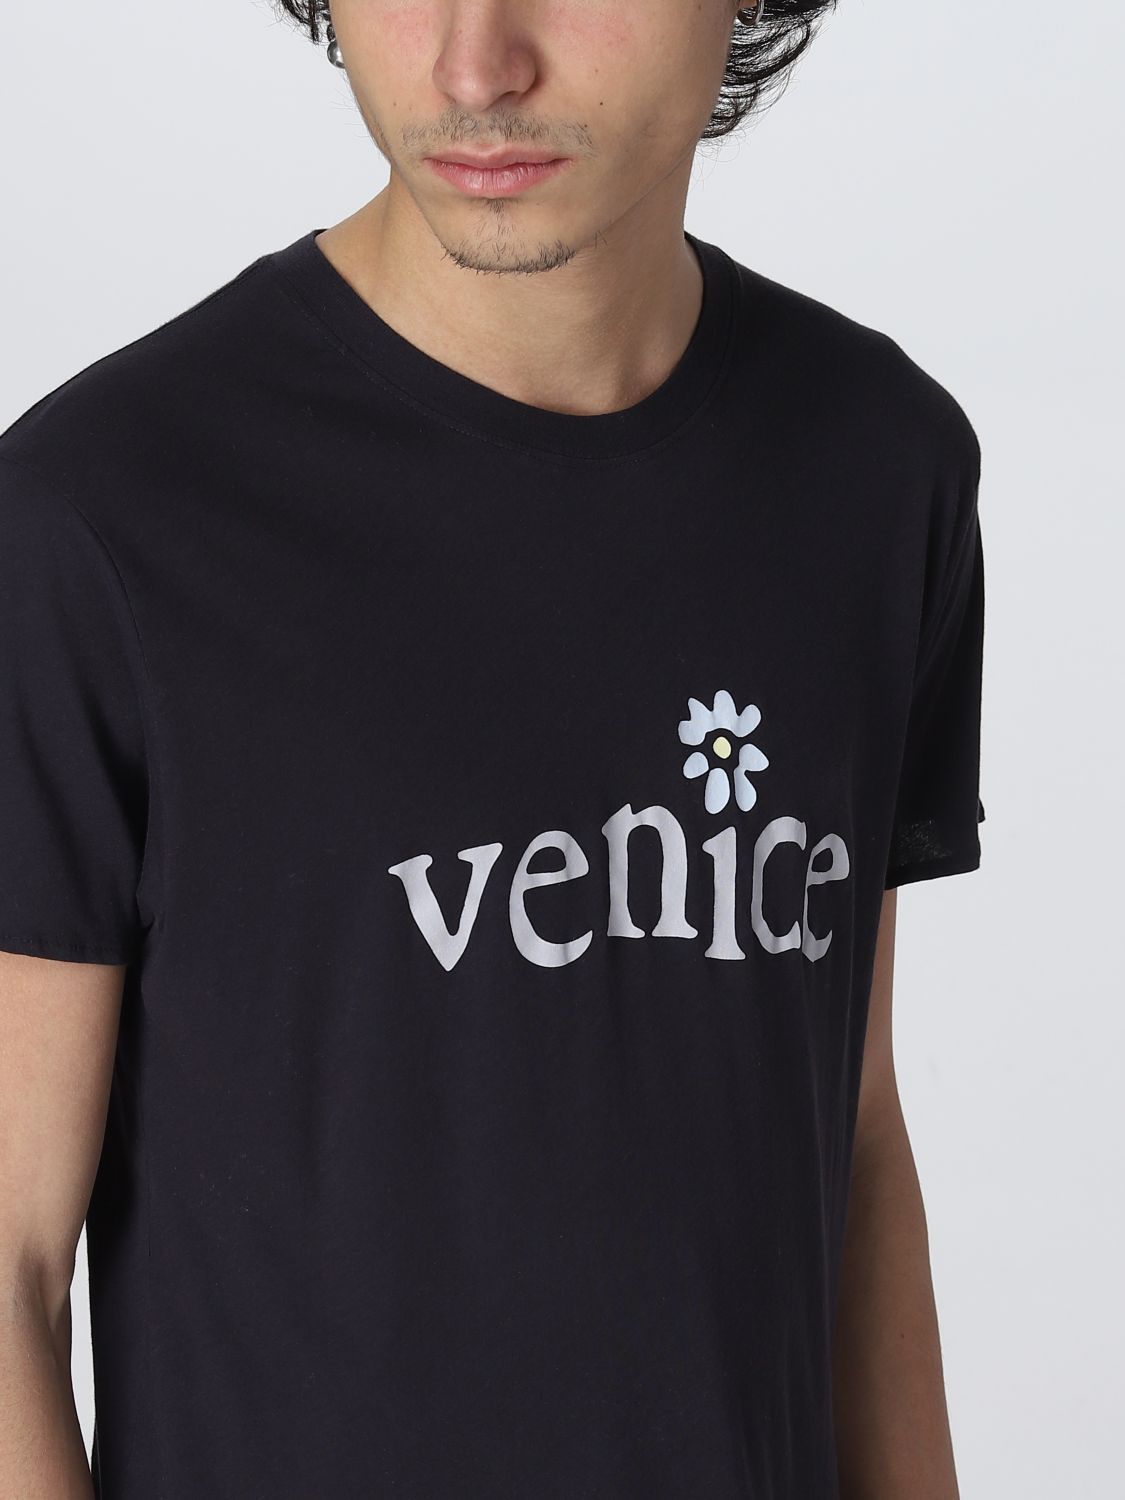 T-shirt Erl: T-shirt Erl con stampa venice nero 5